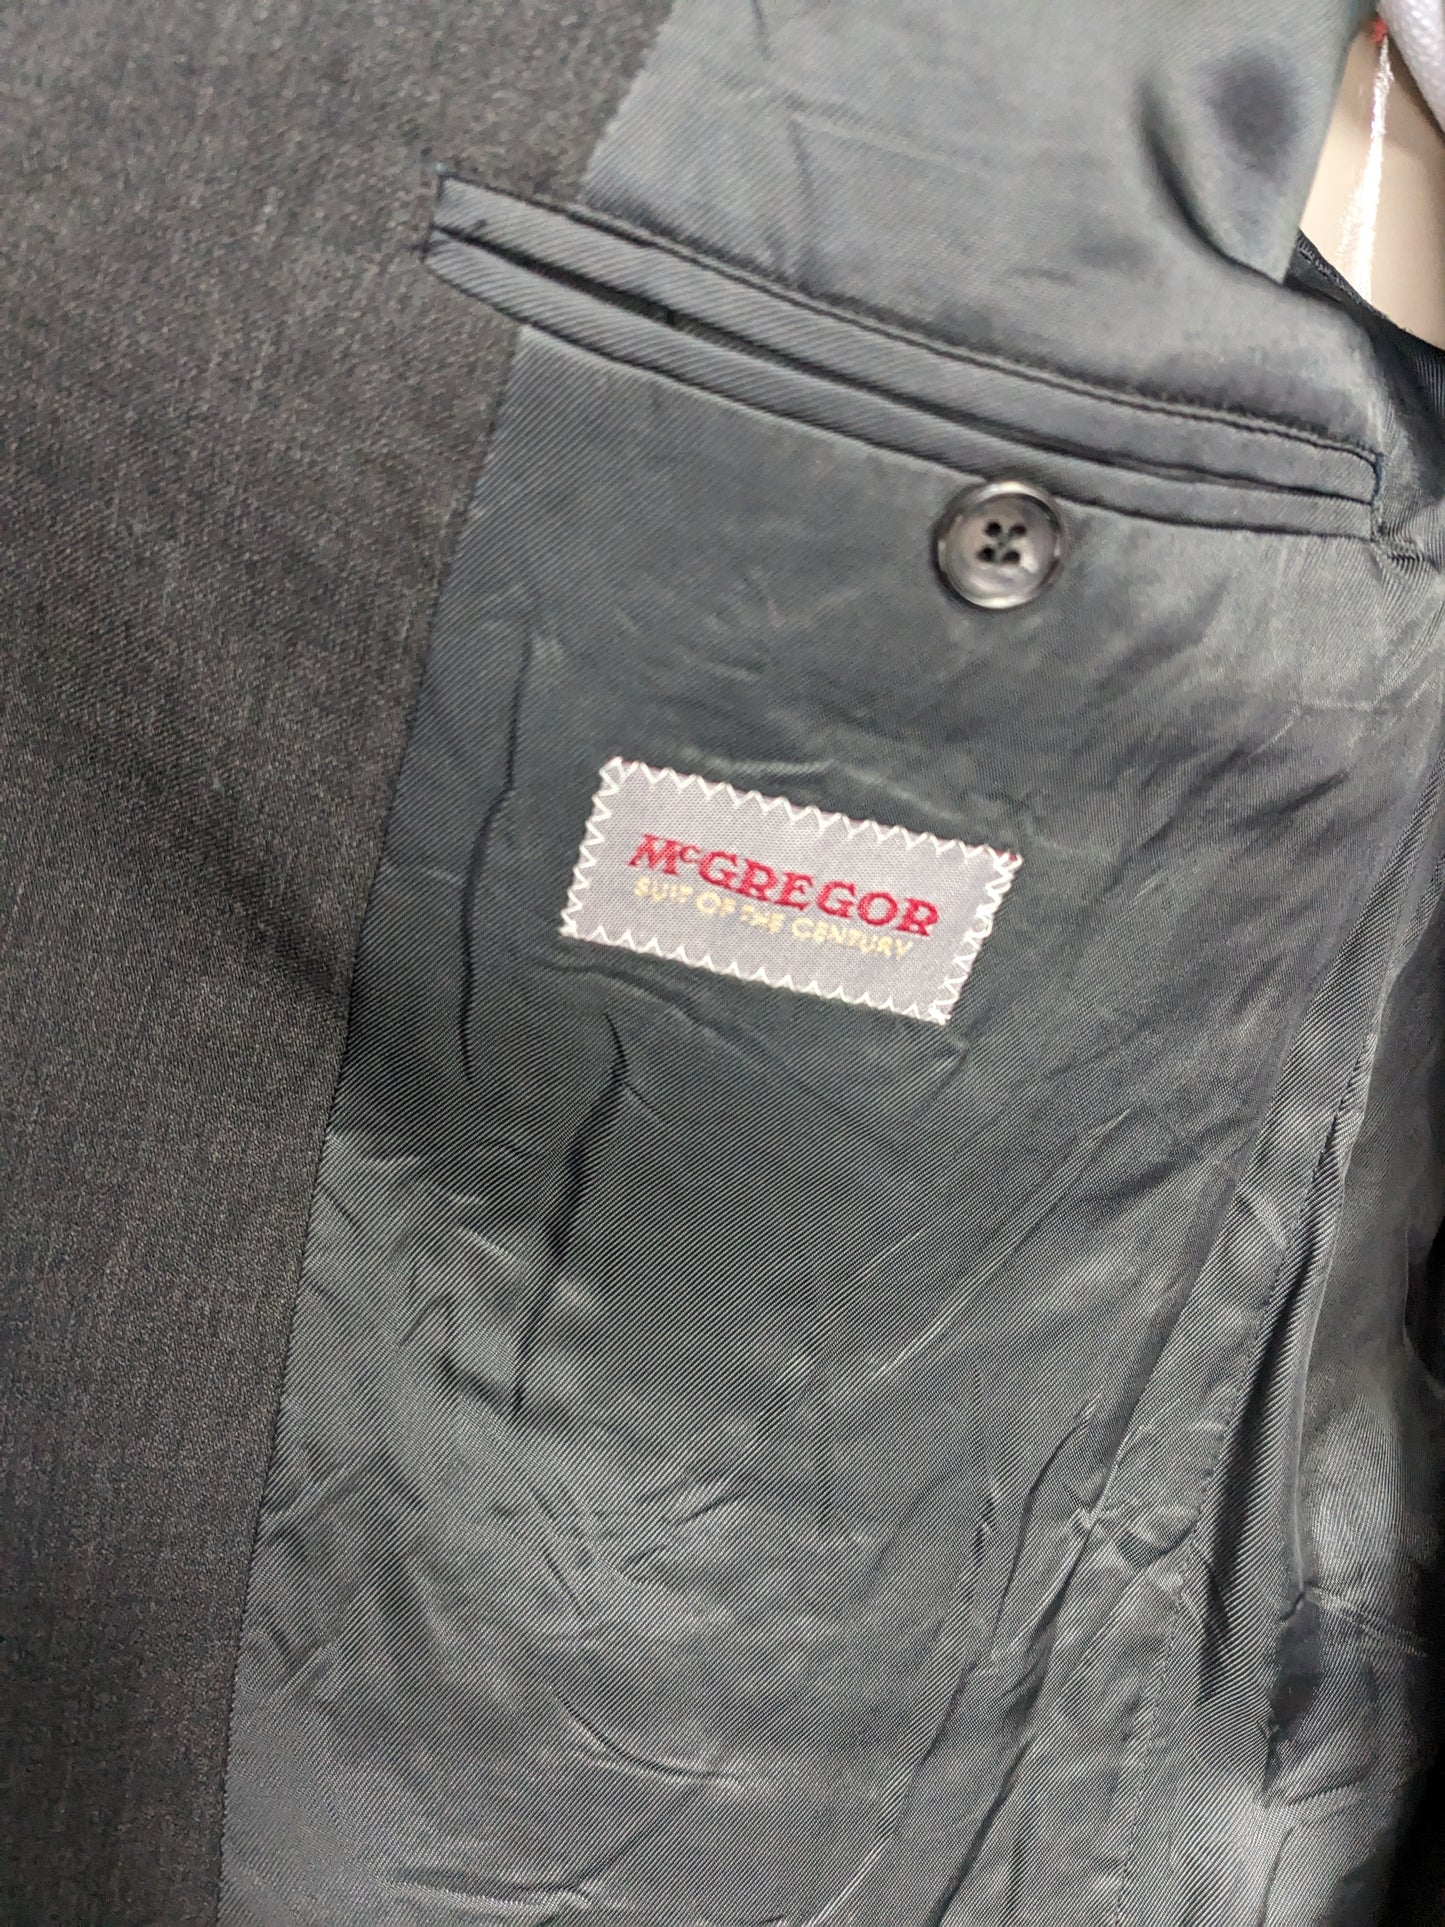 McGregor President's Collection Colbert. Dark gray colored. Size 26 (52 / L).